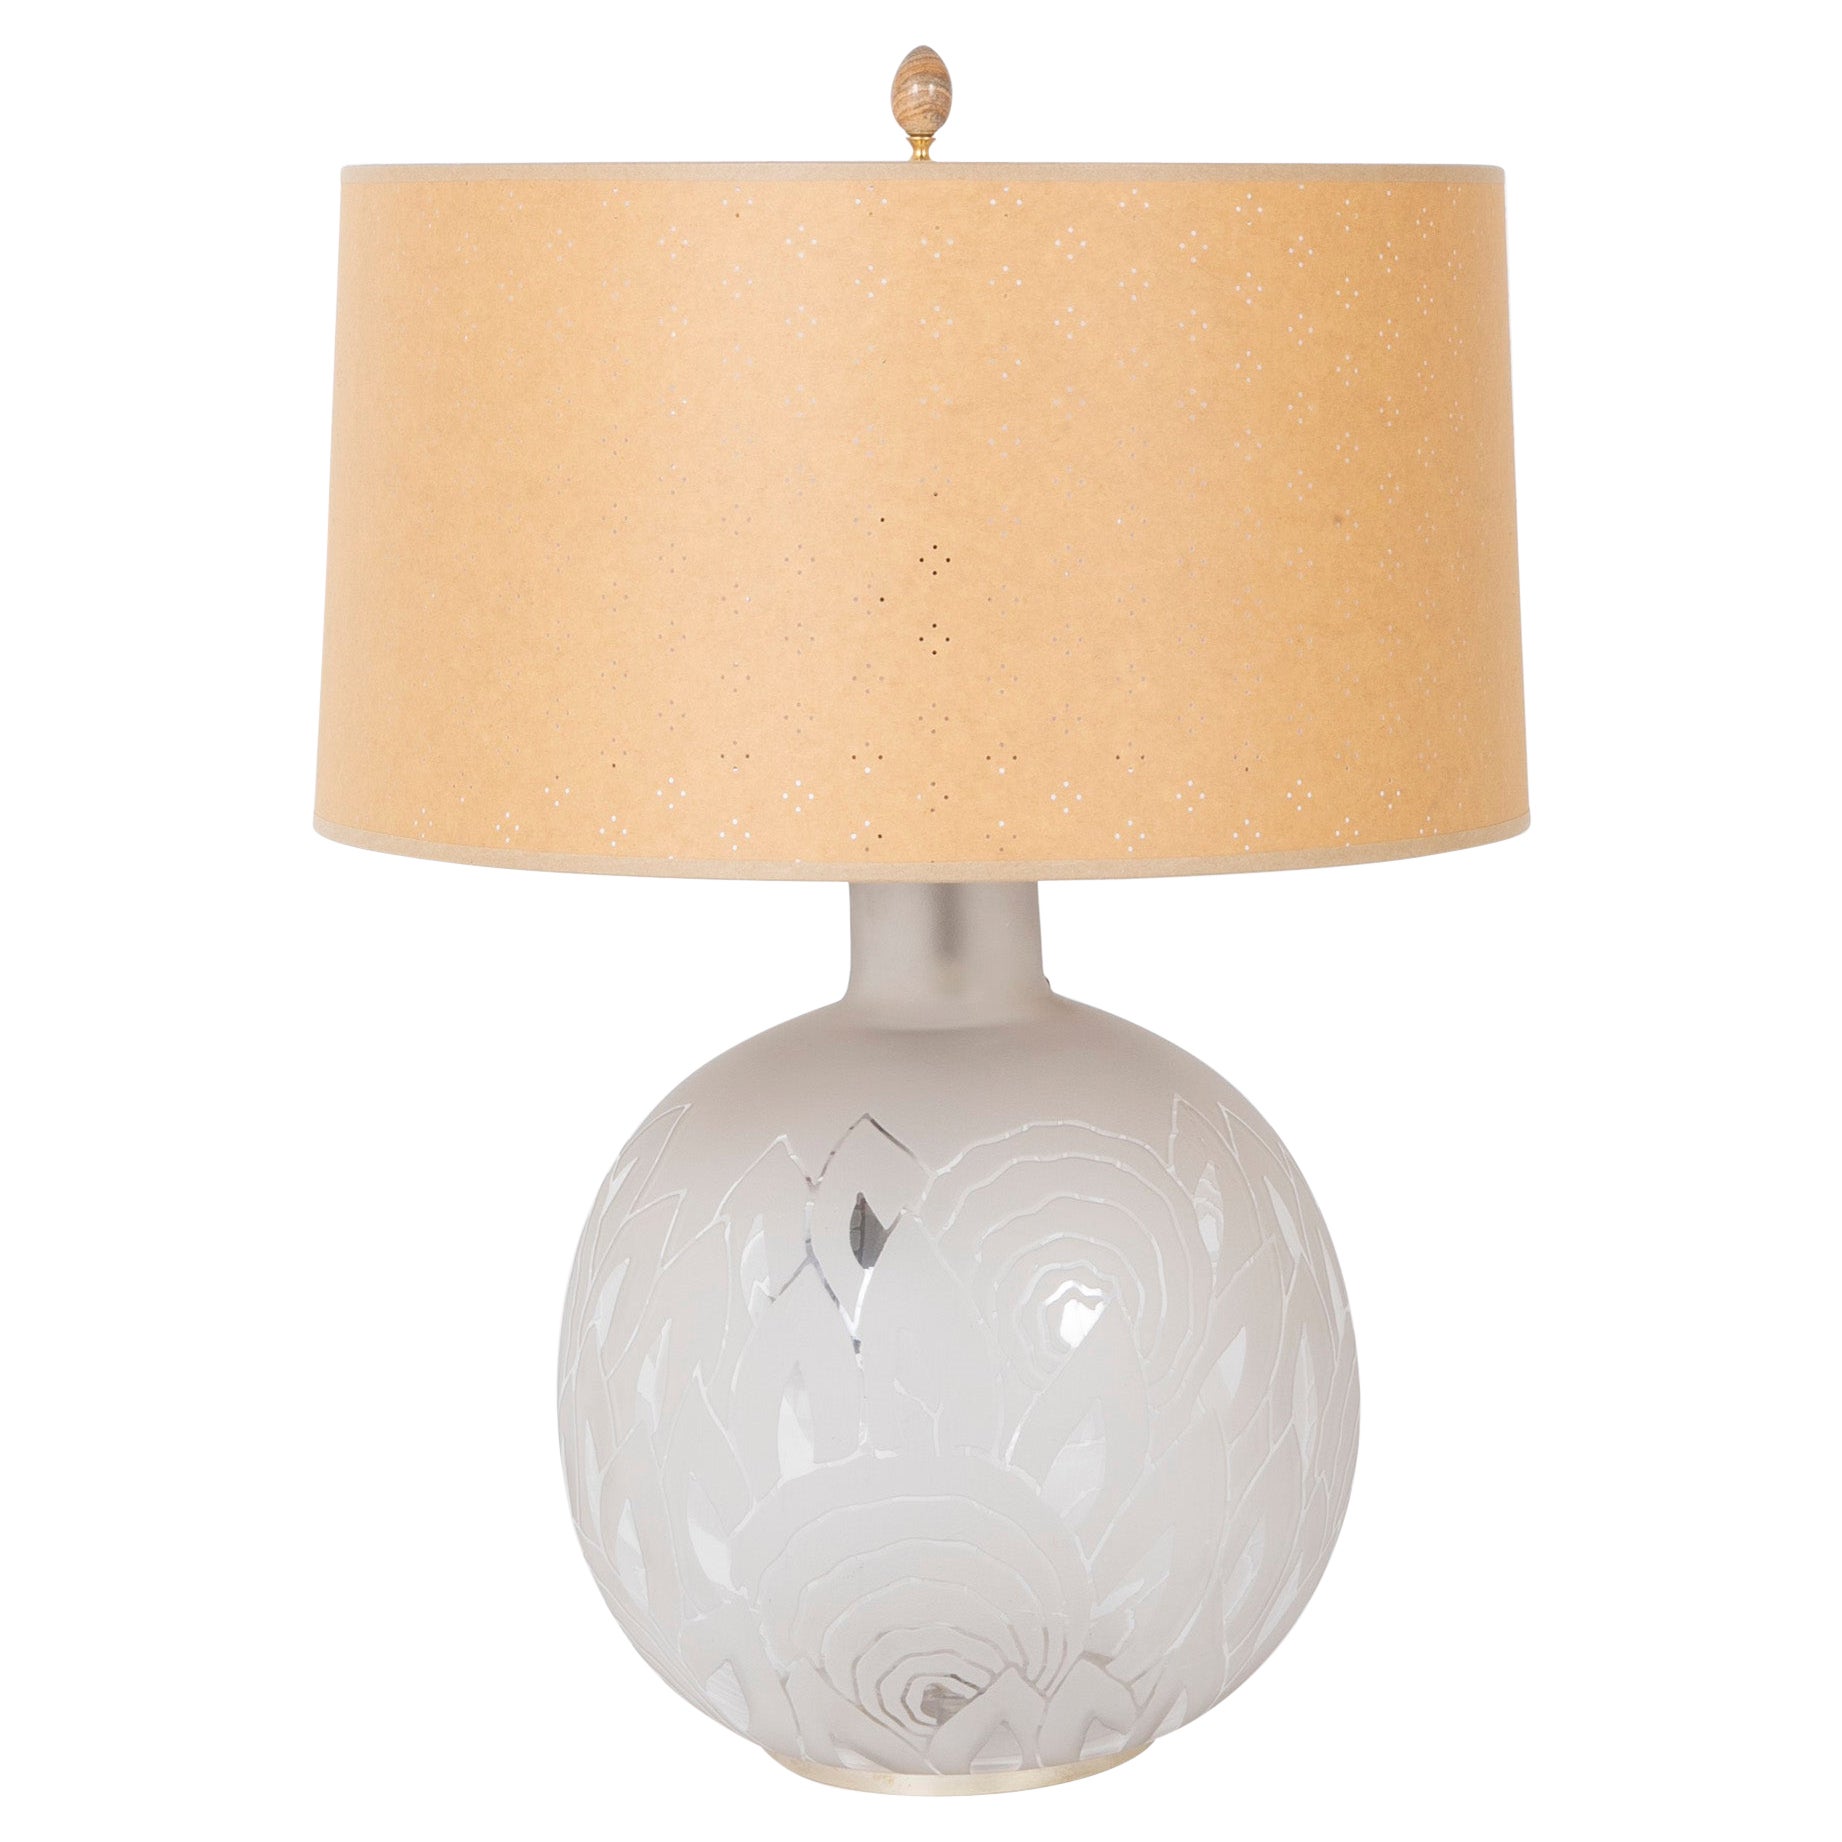 Jean Boris Lacroix Etched Glass Lamp in Rounded Form